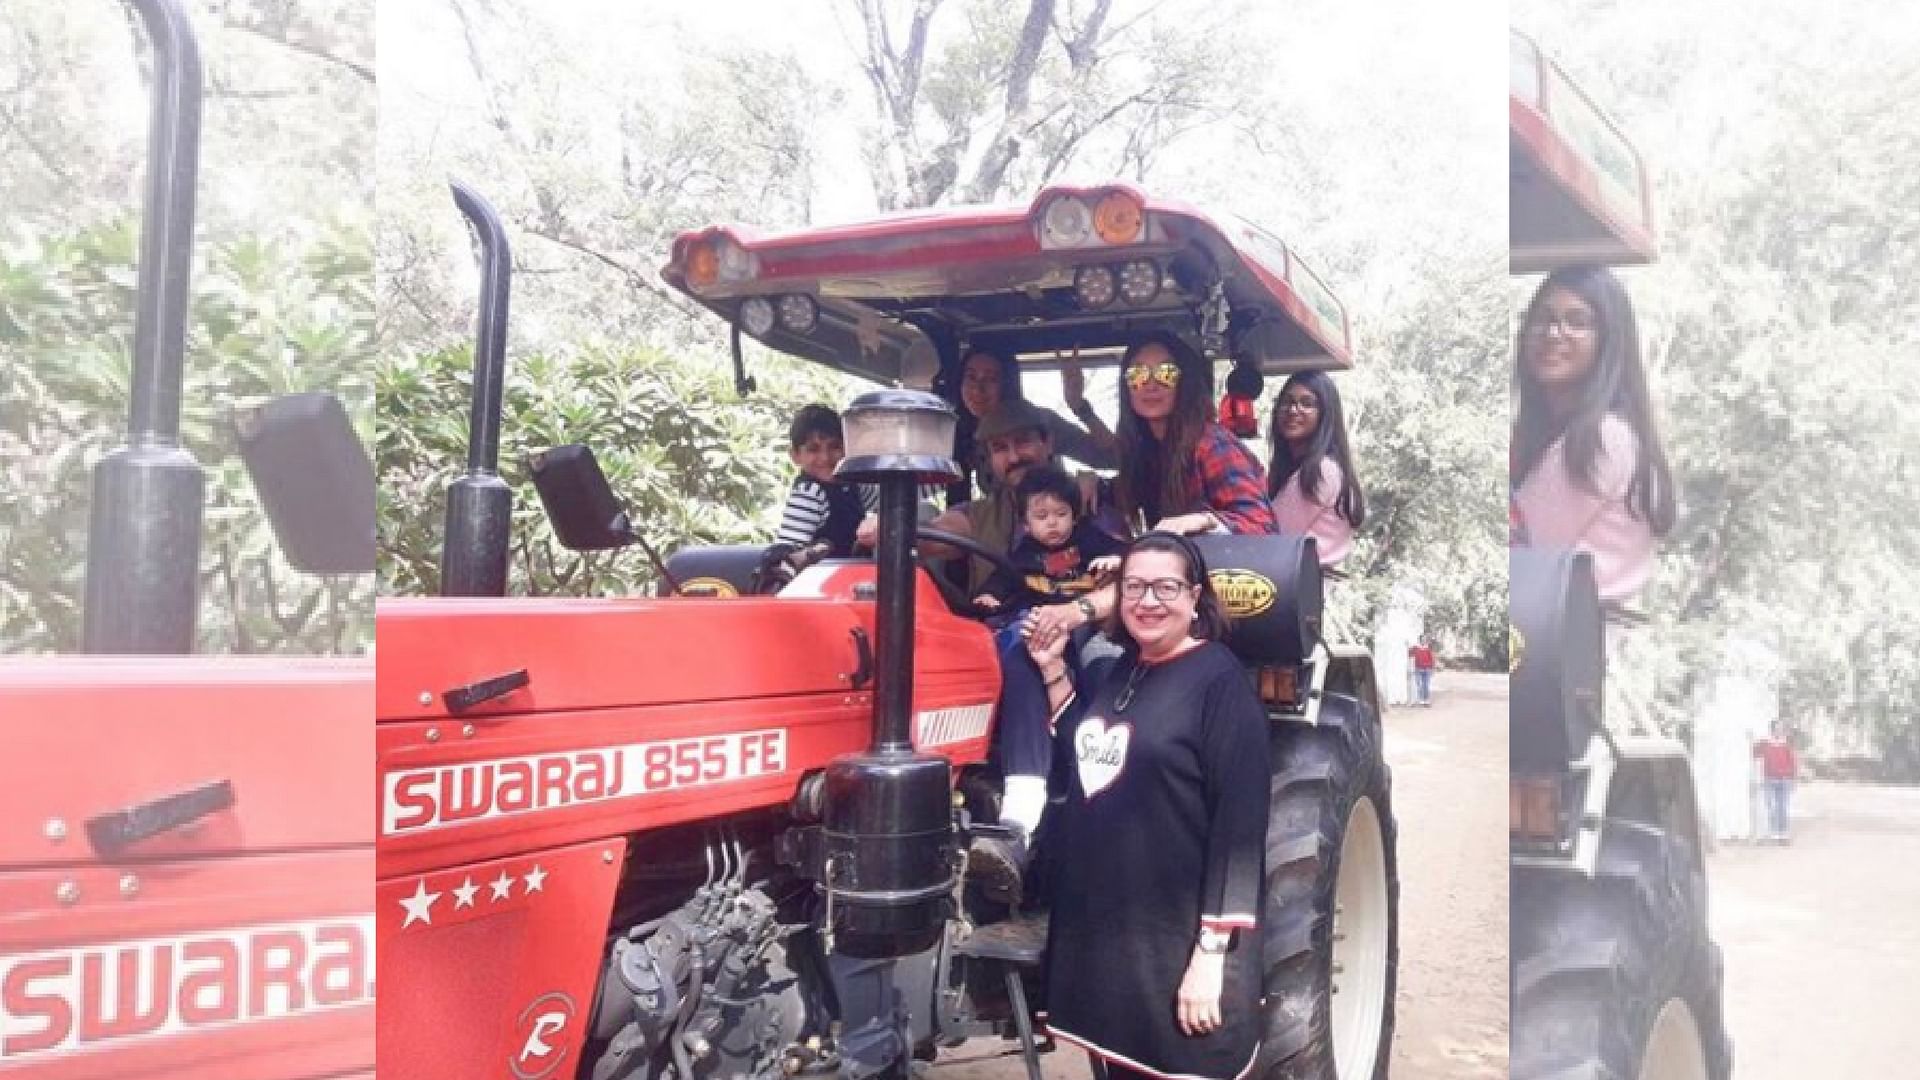 The Kapoor family takes a ride with Taimur and Saif Ali Khan on a tractor.